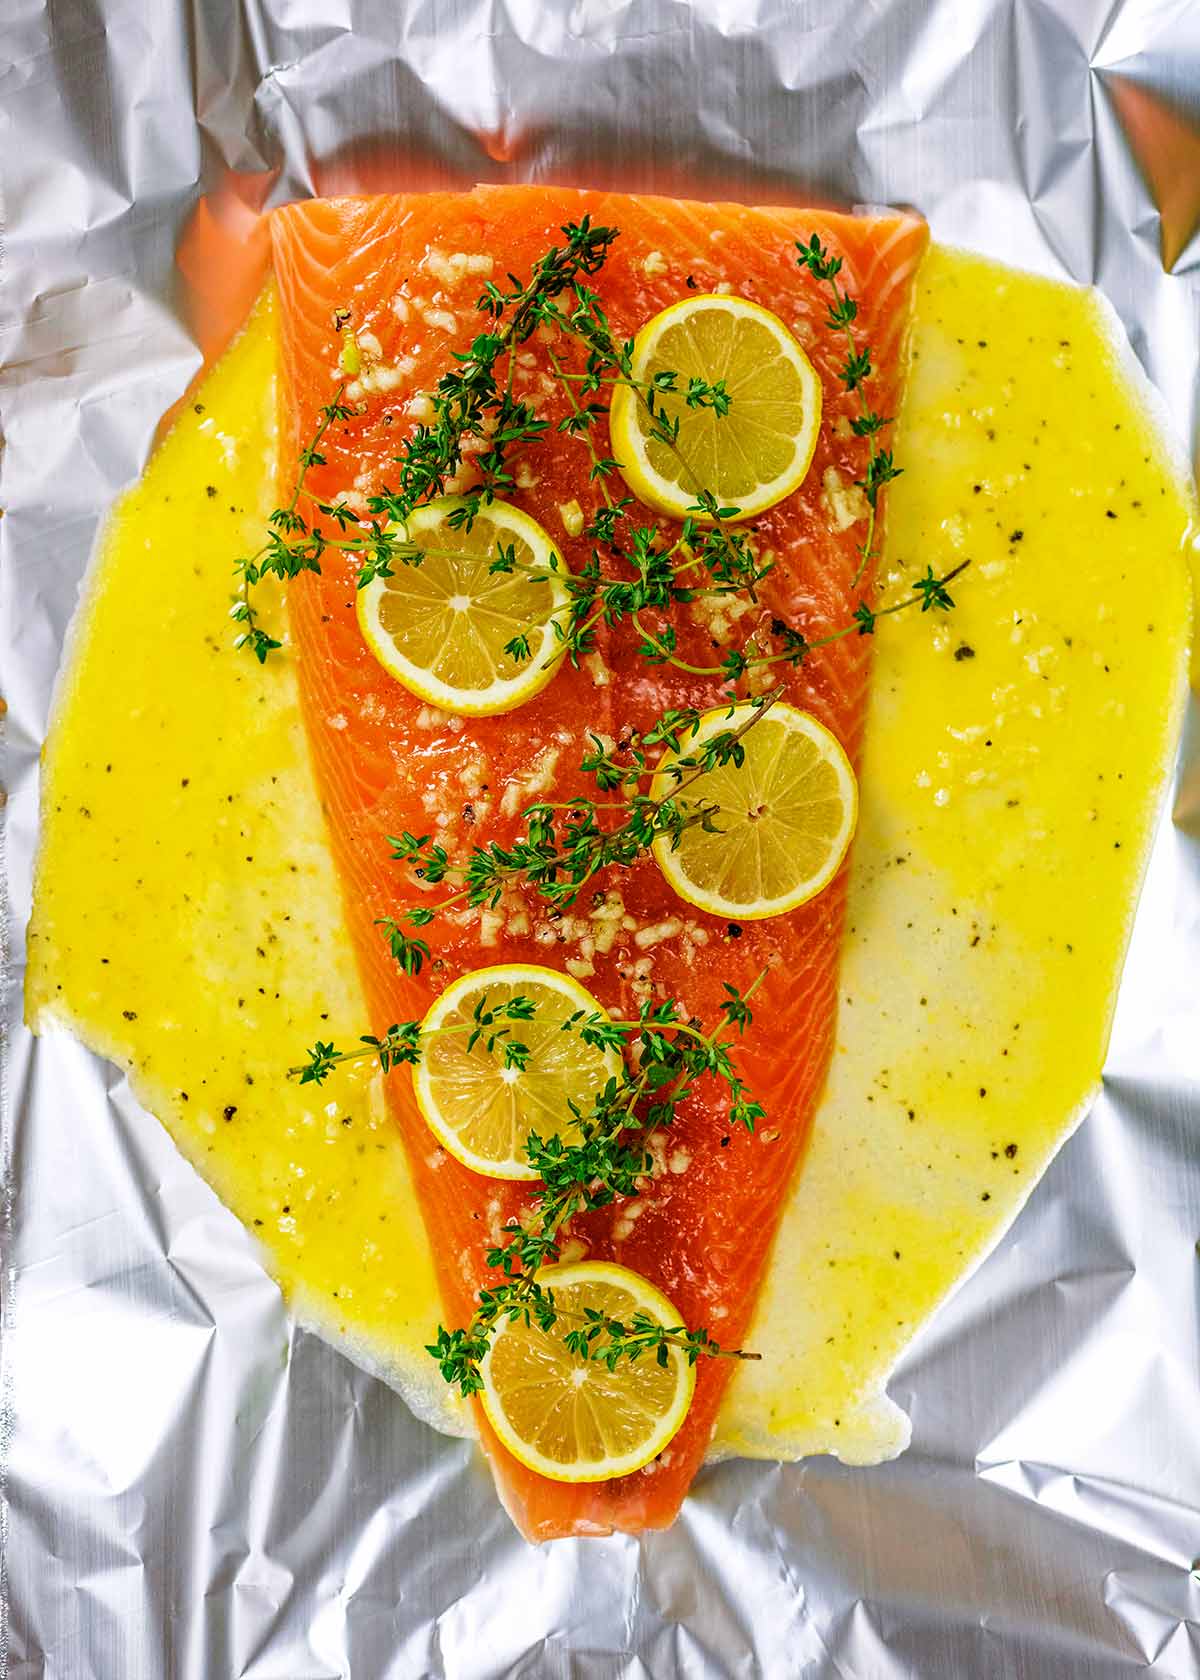 A whole side of salmon on a sheet of foil covered in a buttery sauce, lemon slices and thyme sprigs.